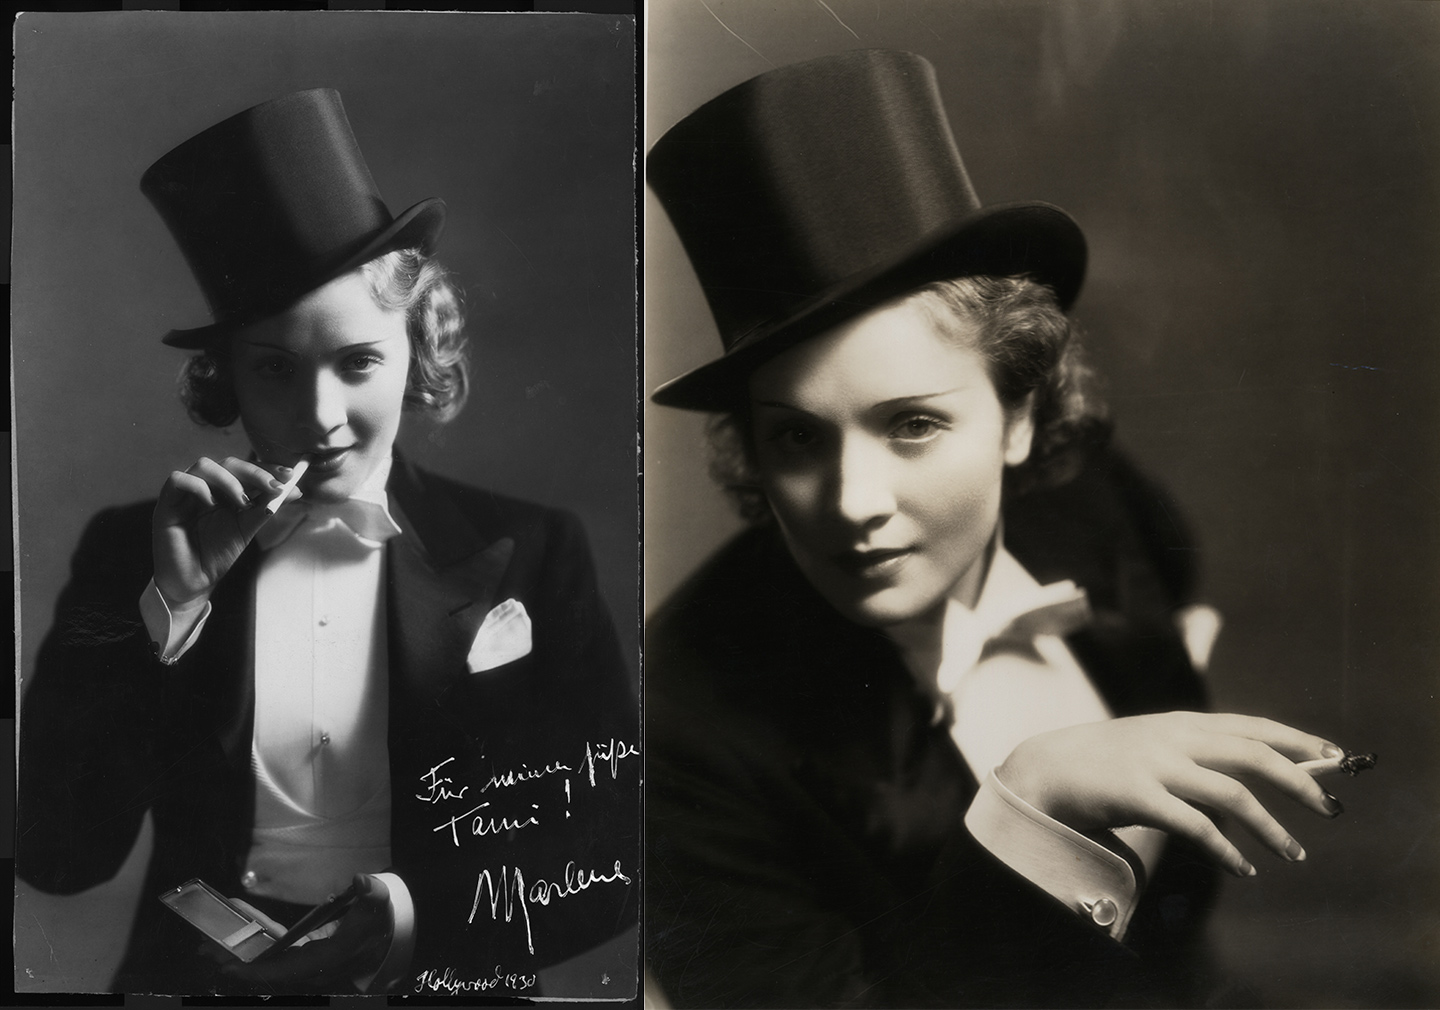 Marlene Dietrich: Dressed for the Image